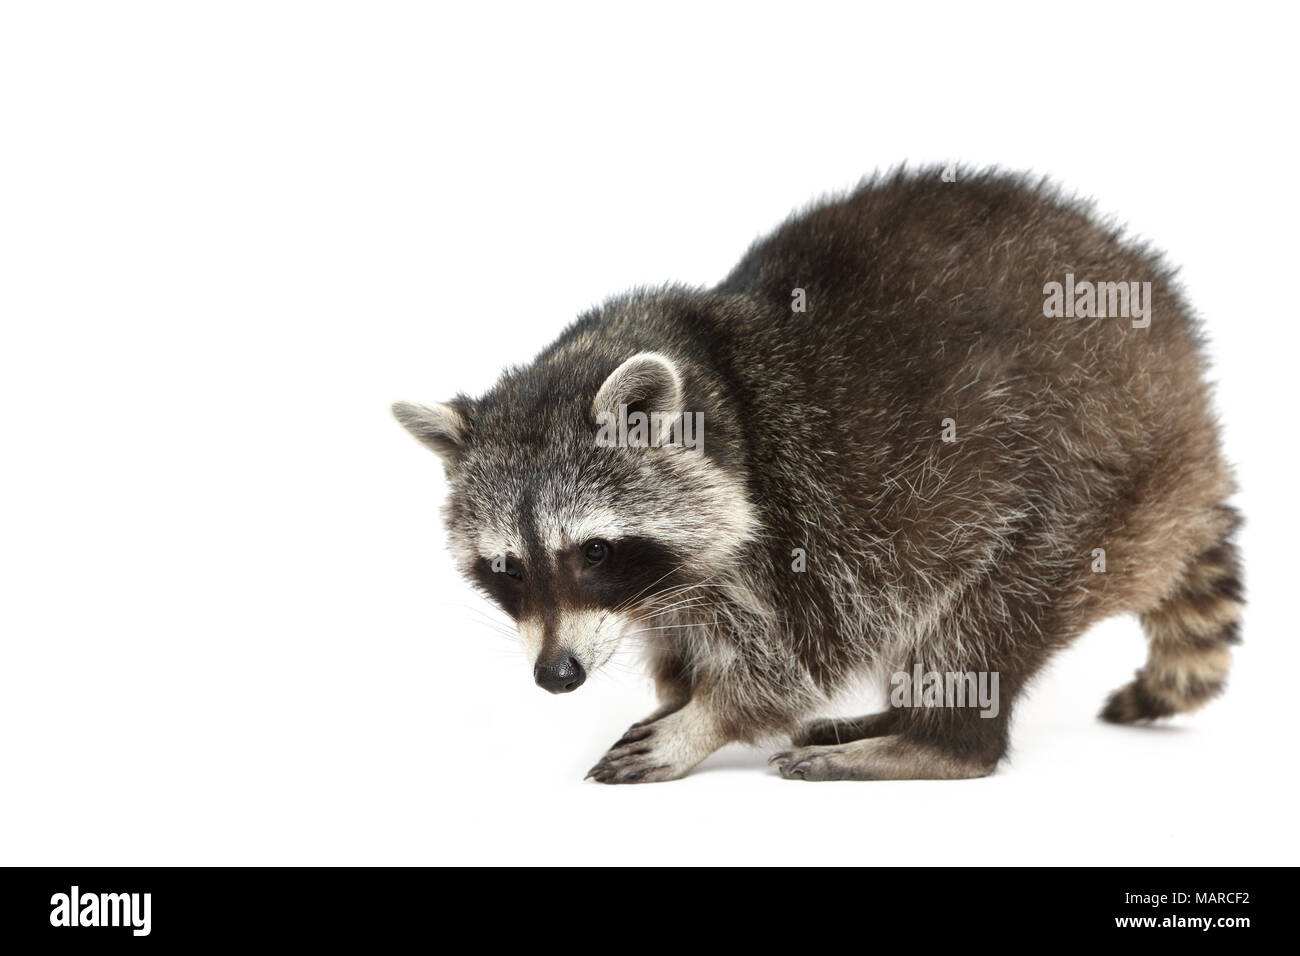 Raccoon (Procyon lotor). Adult standing, seen side-on. Studio picture against a white background. Germany Stock Photo